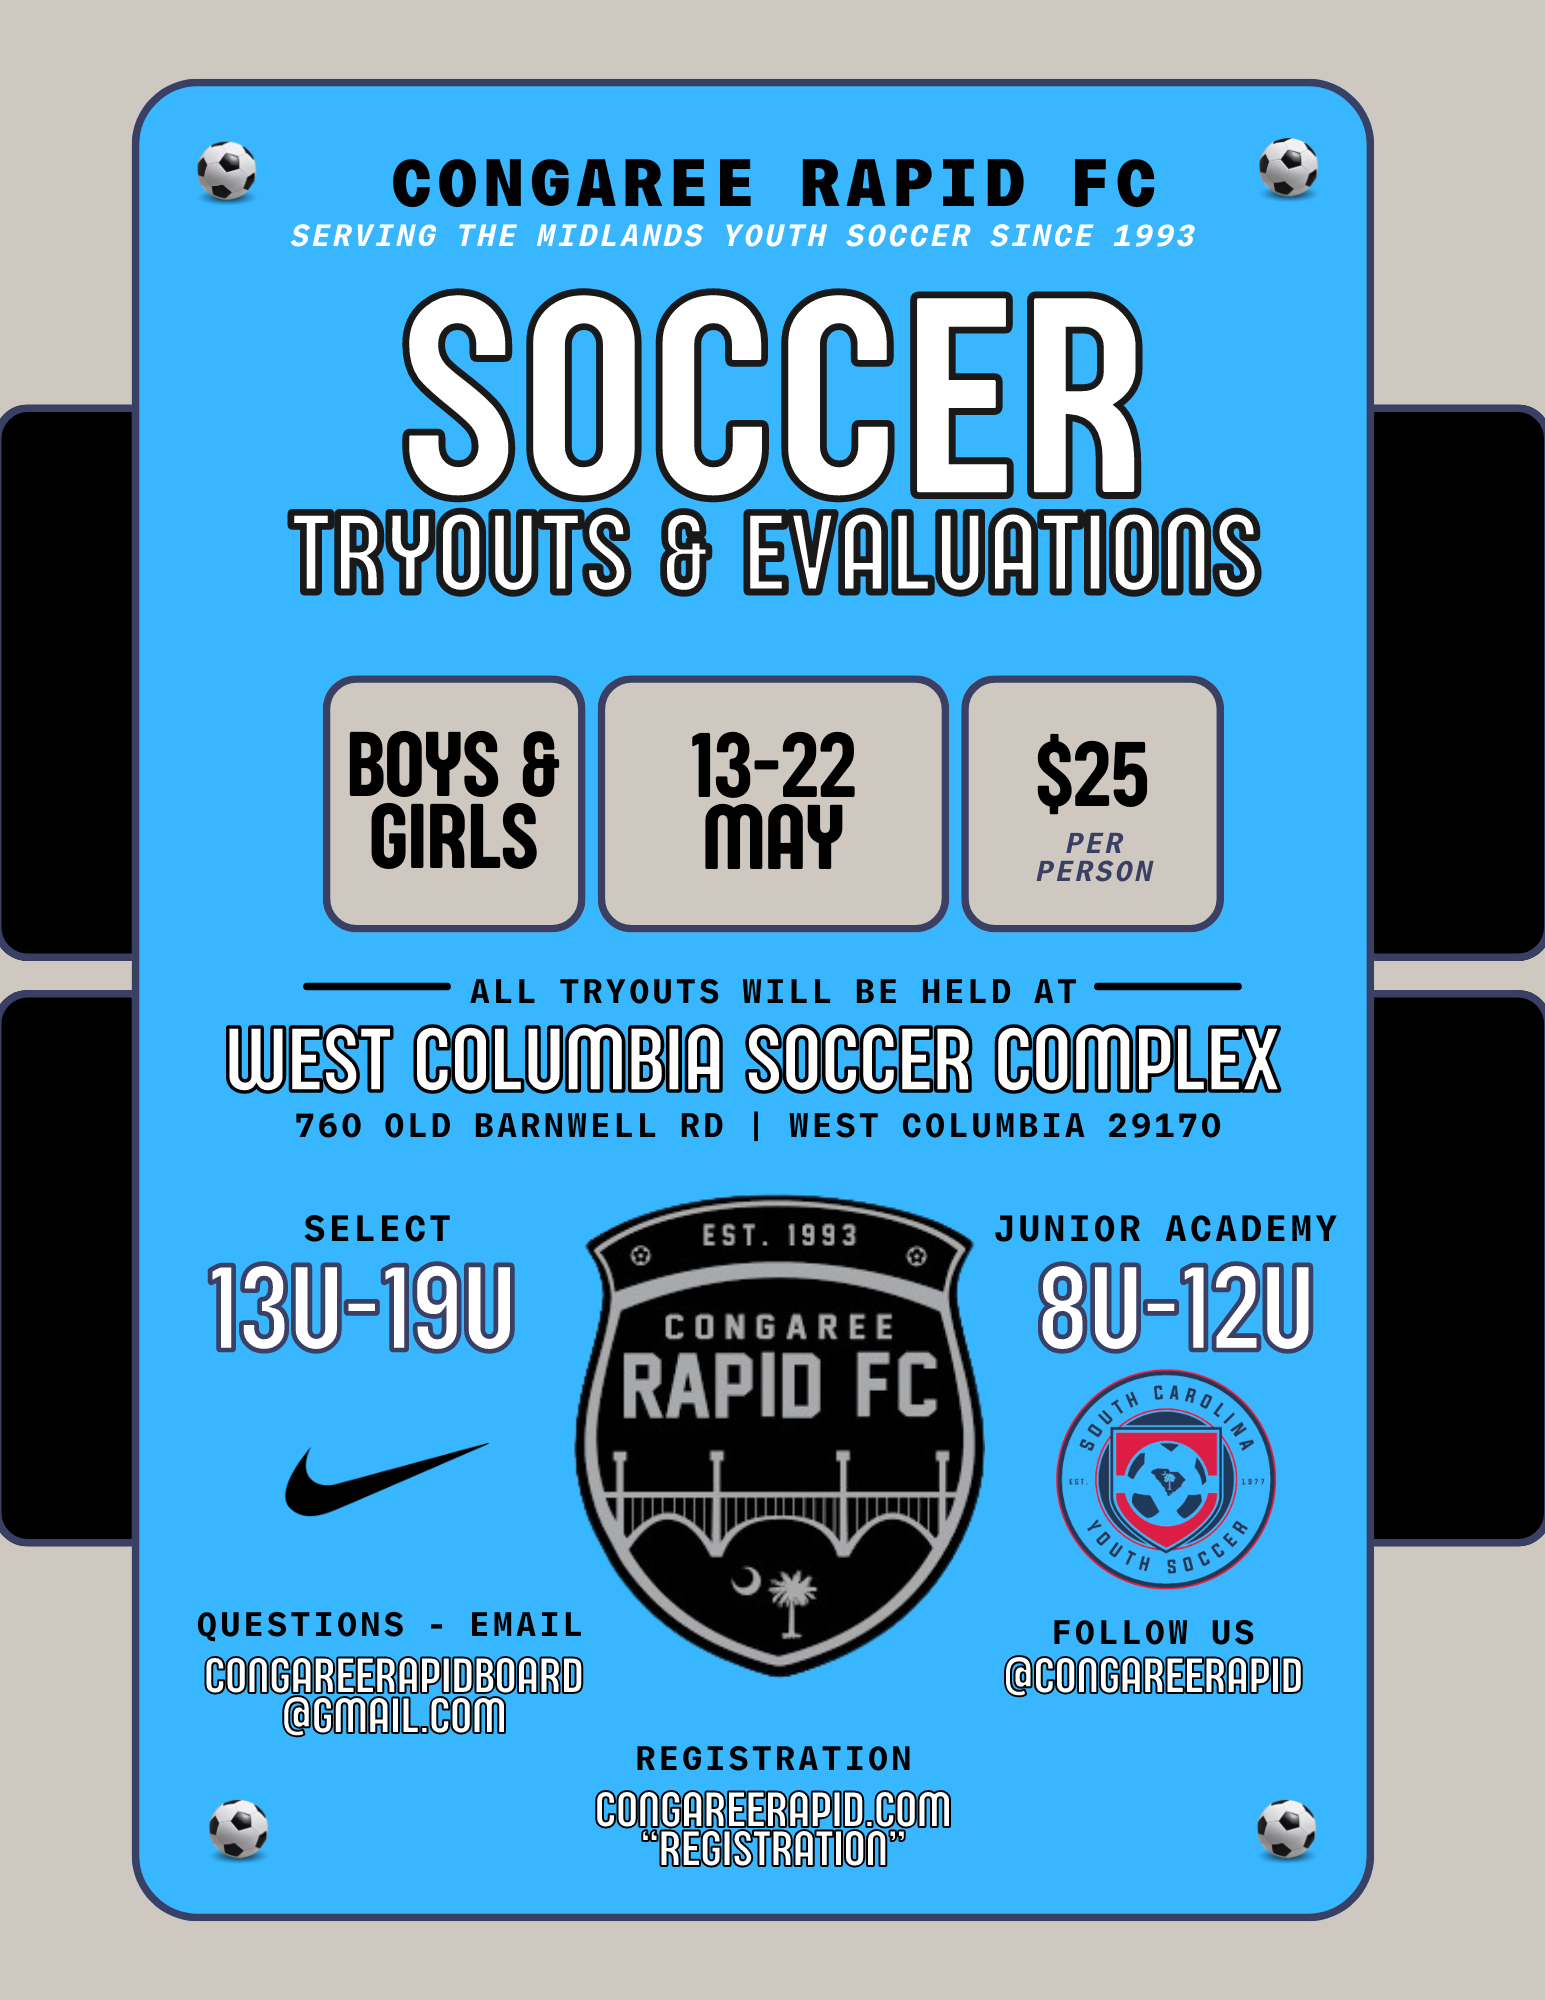 CRFC Select Tryouts & Junior Academy Evaluations